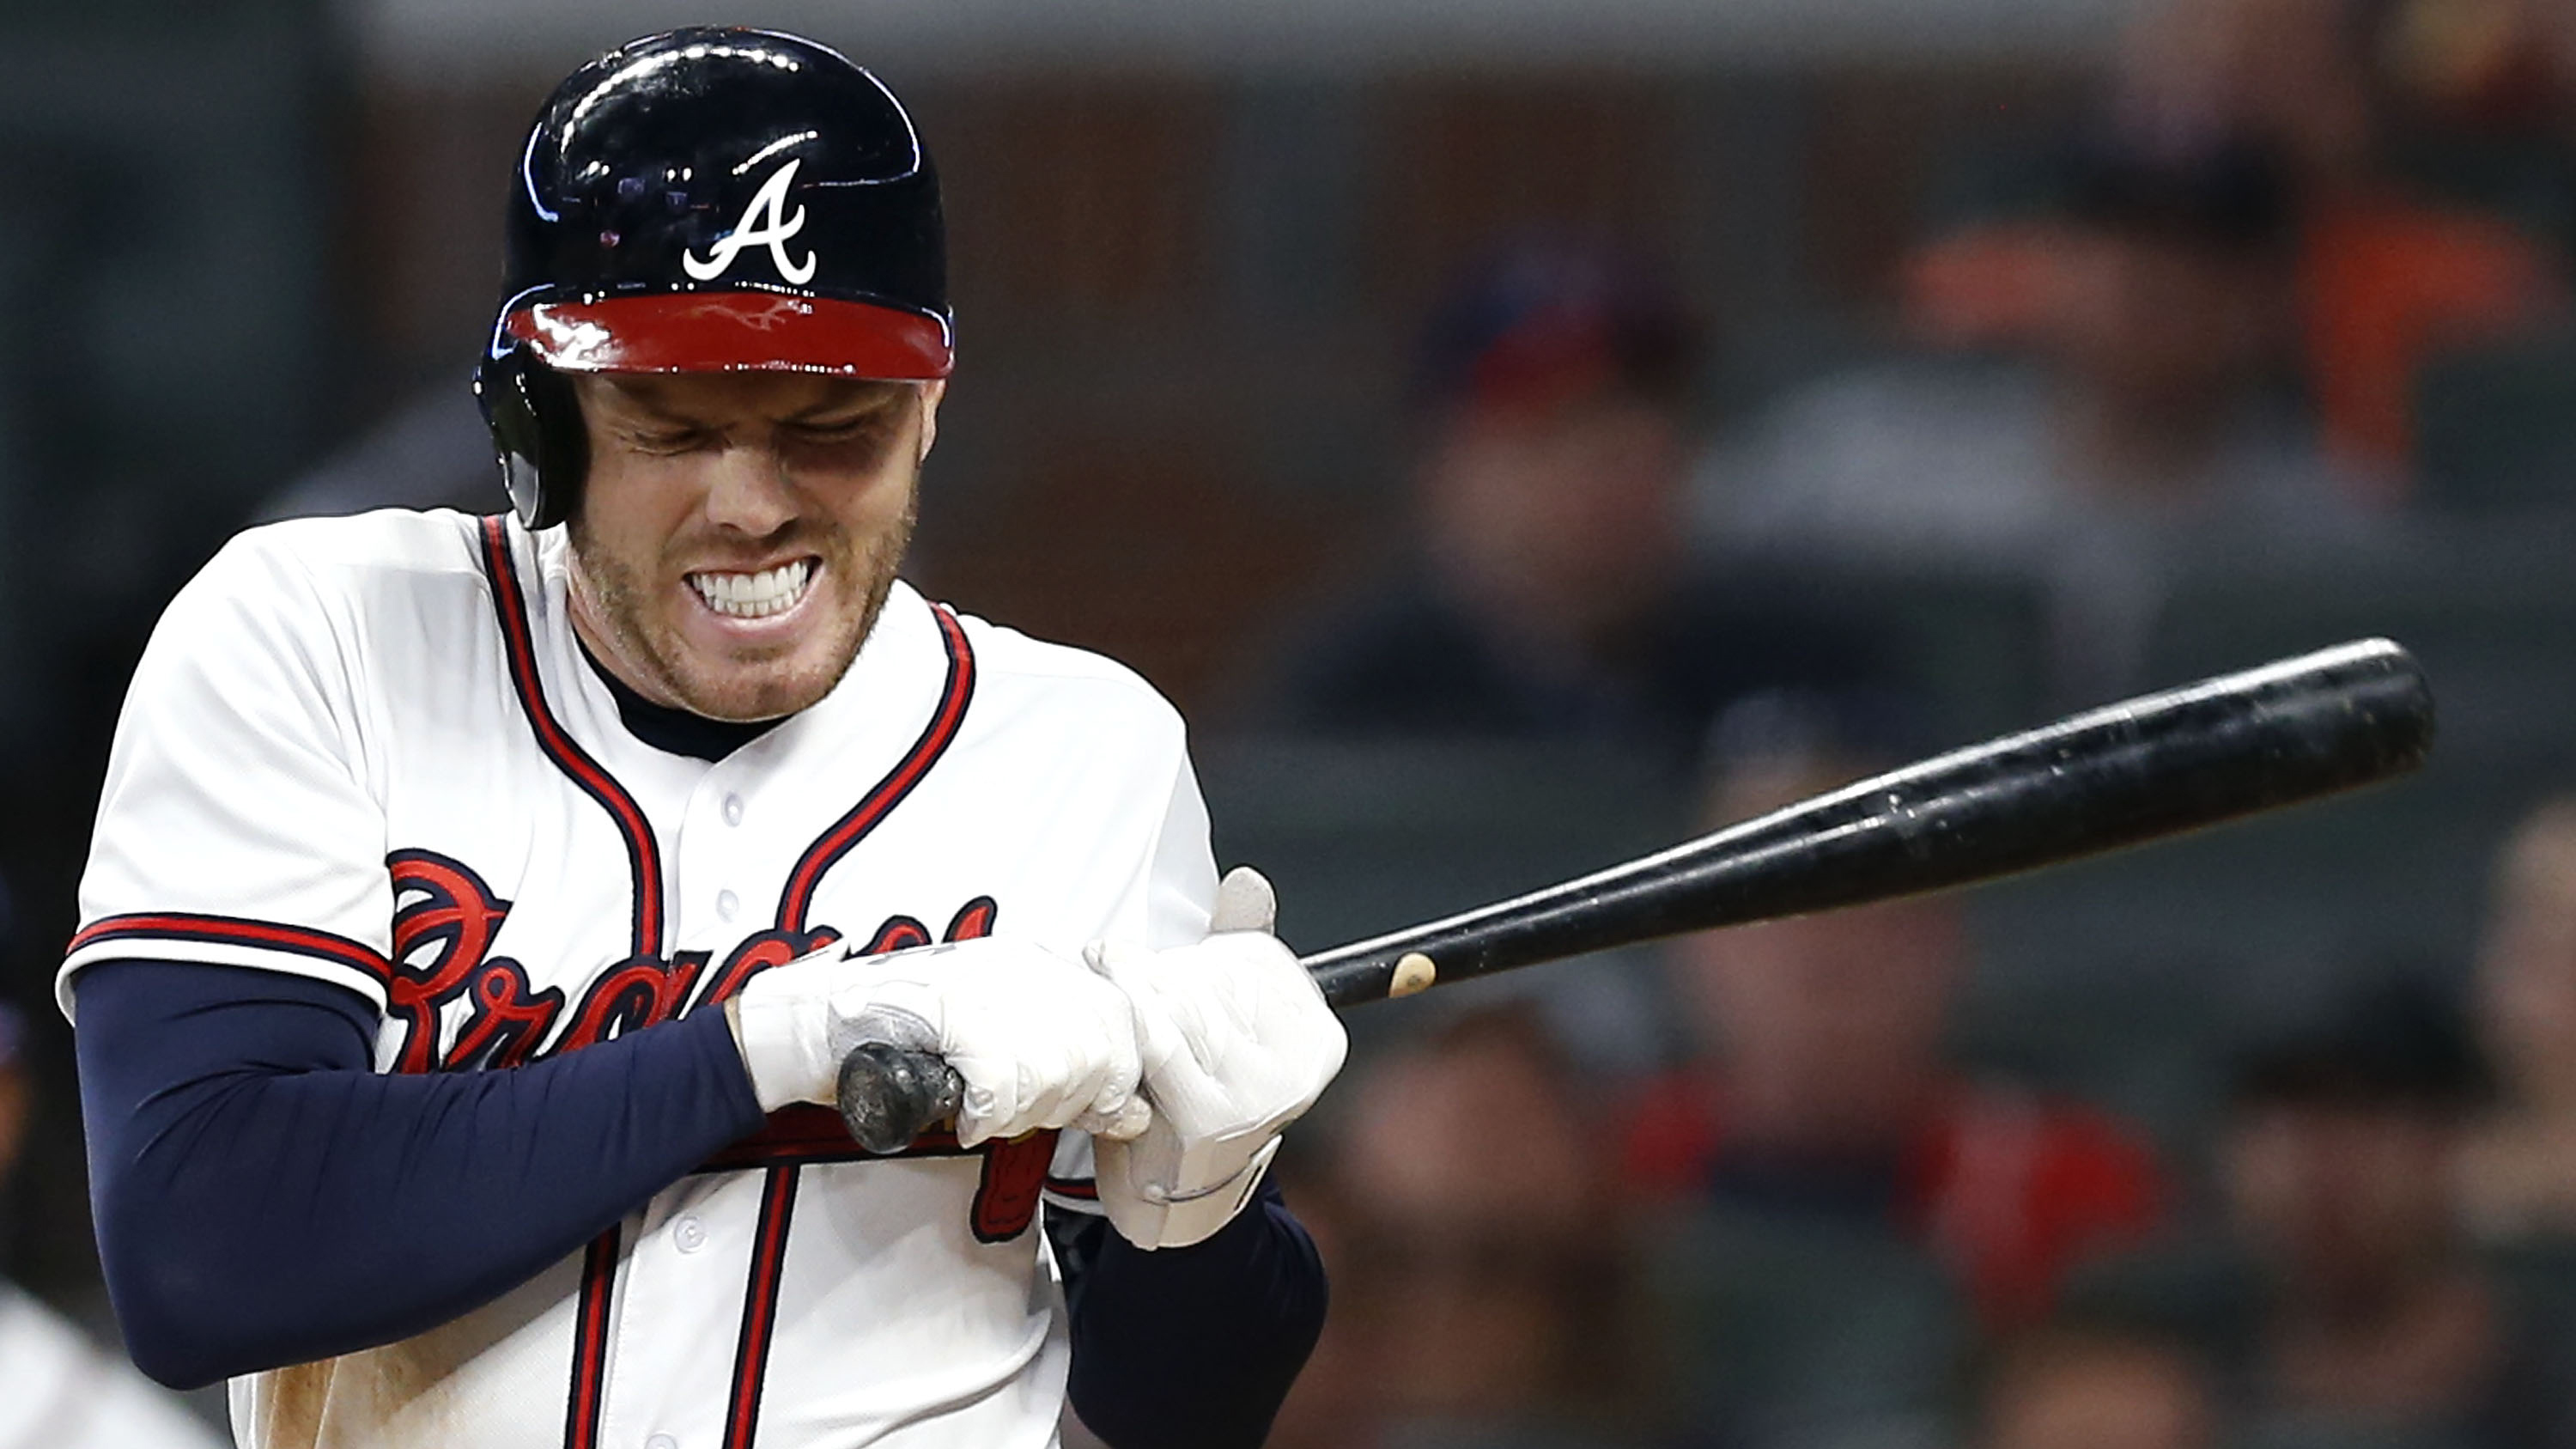 Freddie Freeman's Brush with the All-Star Game